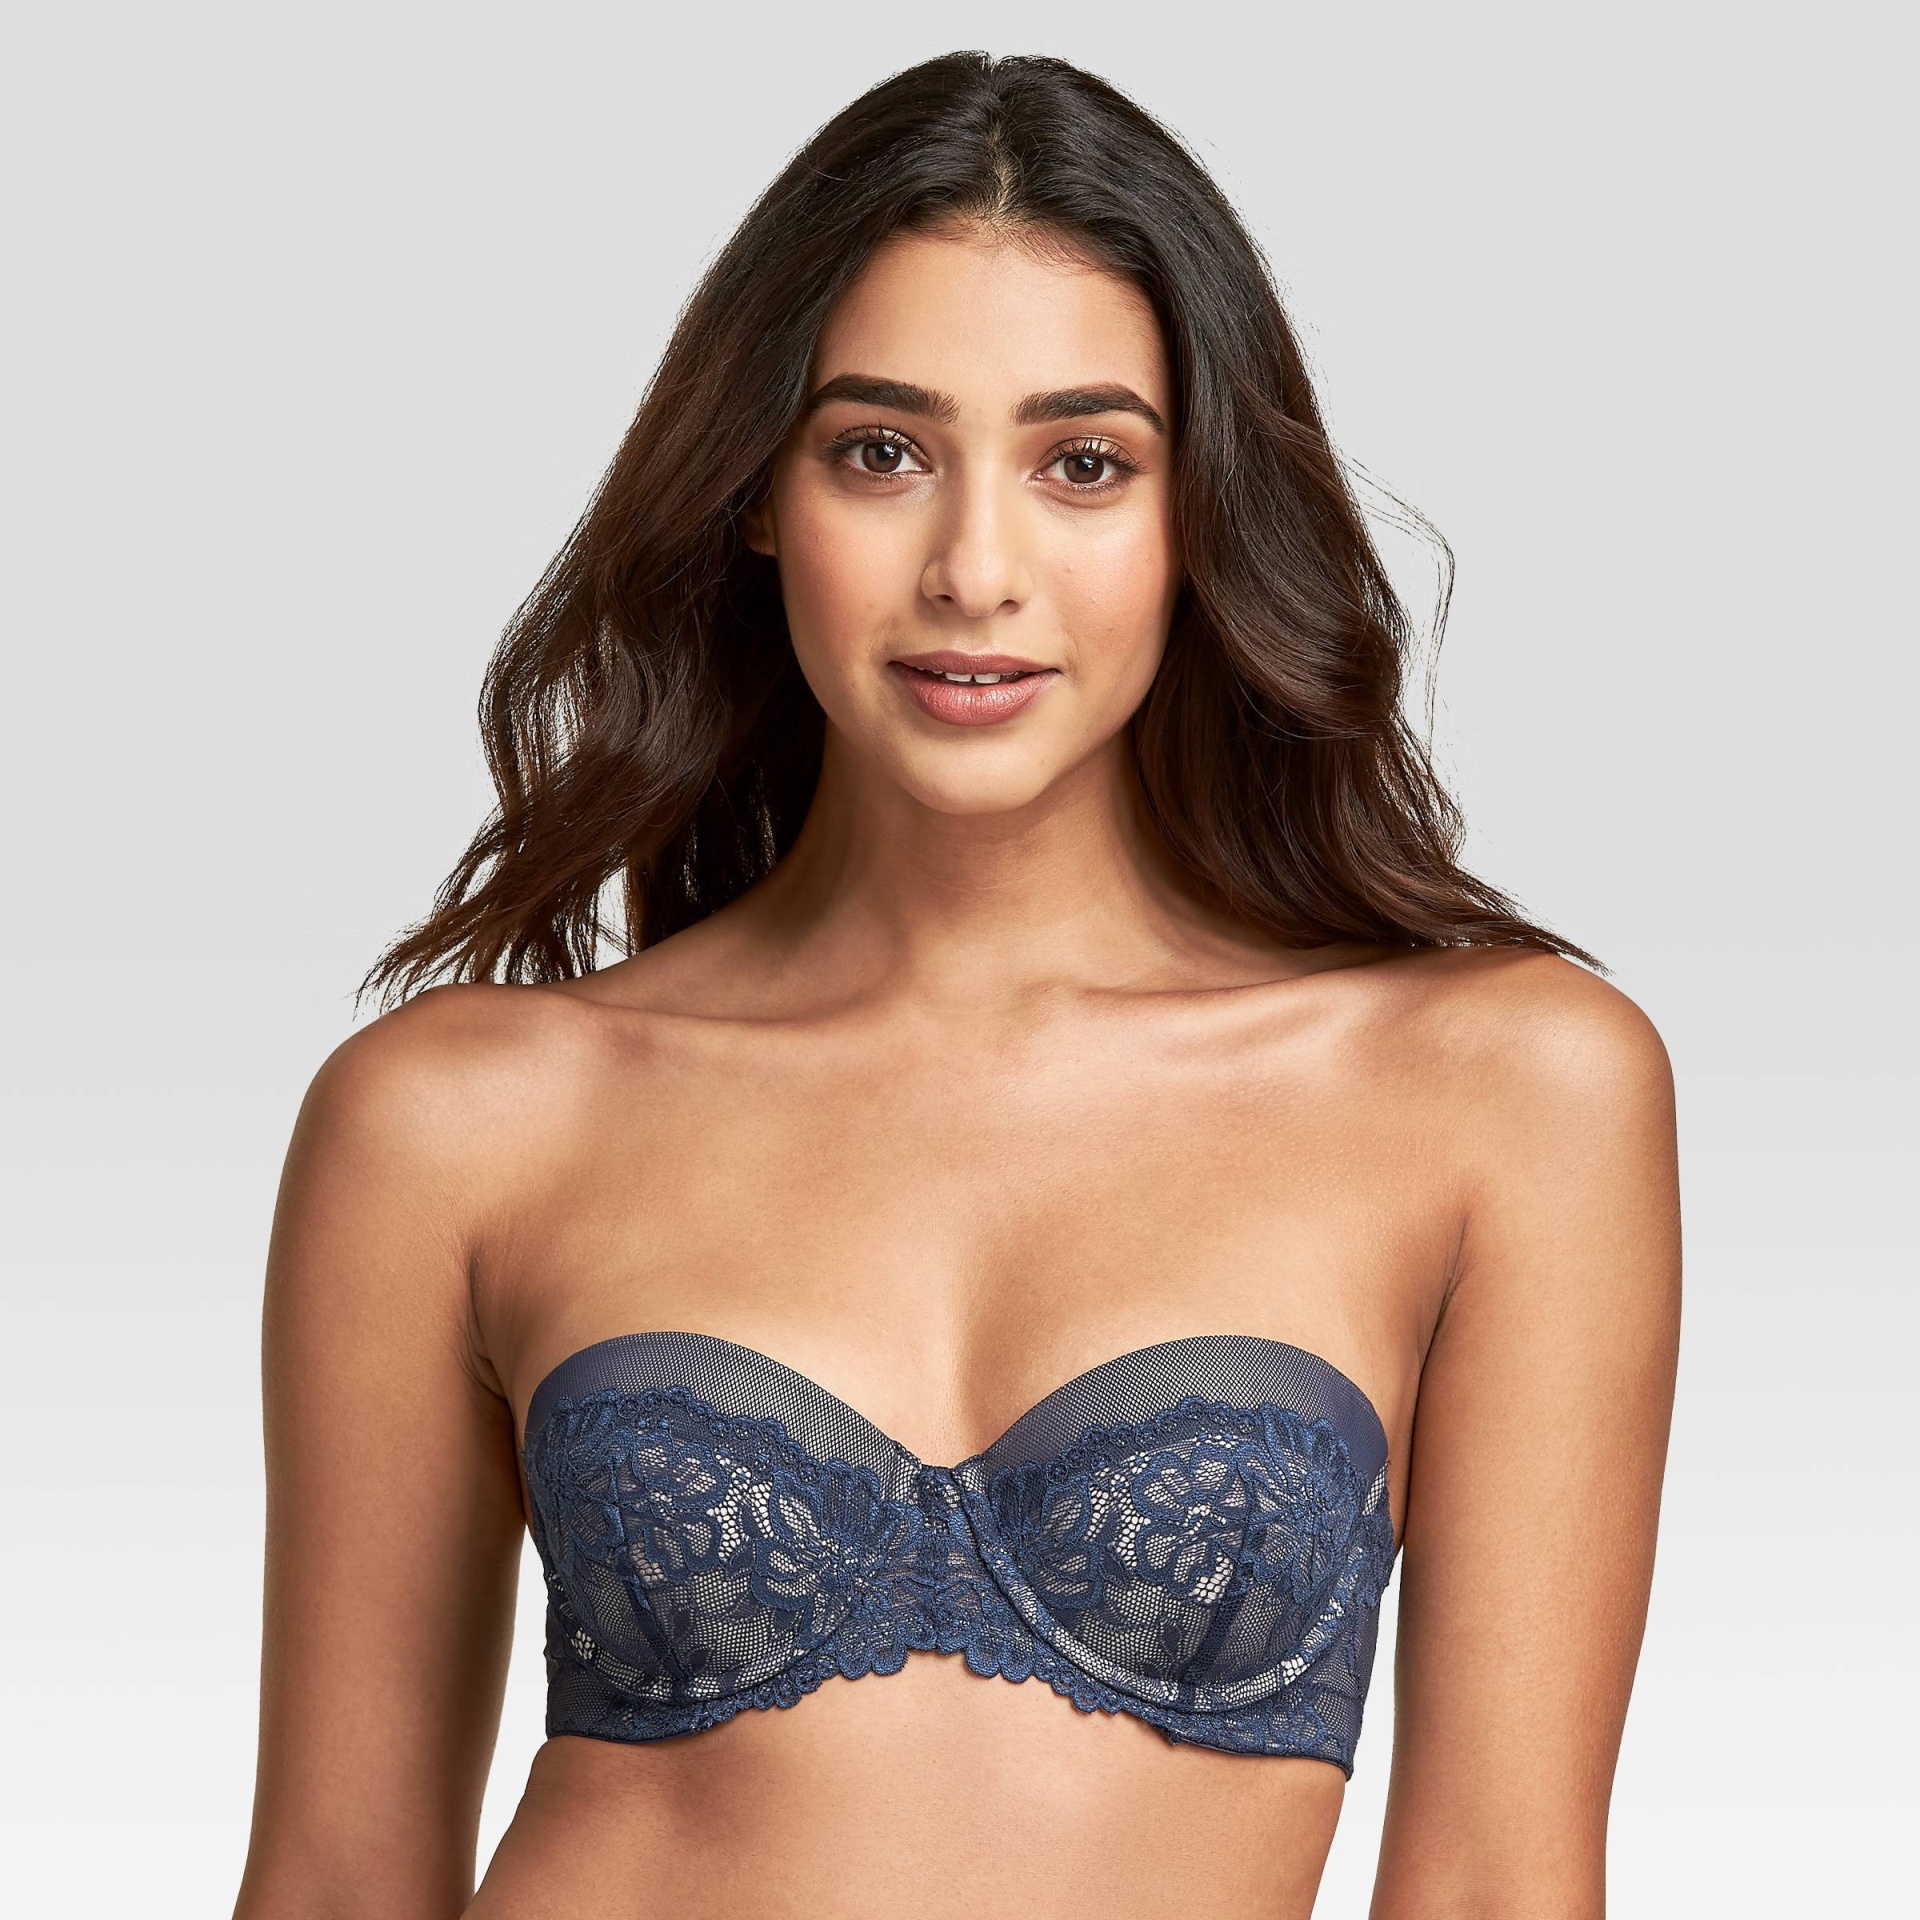 Maidenform Self Expressions Women's Multiway Push-Up Bra SE1102 -  Navy/Gloss 34A 1 ct